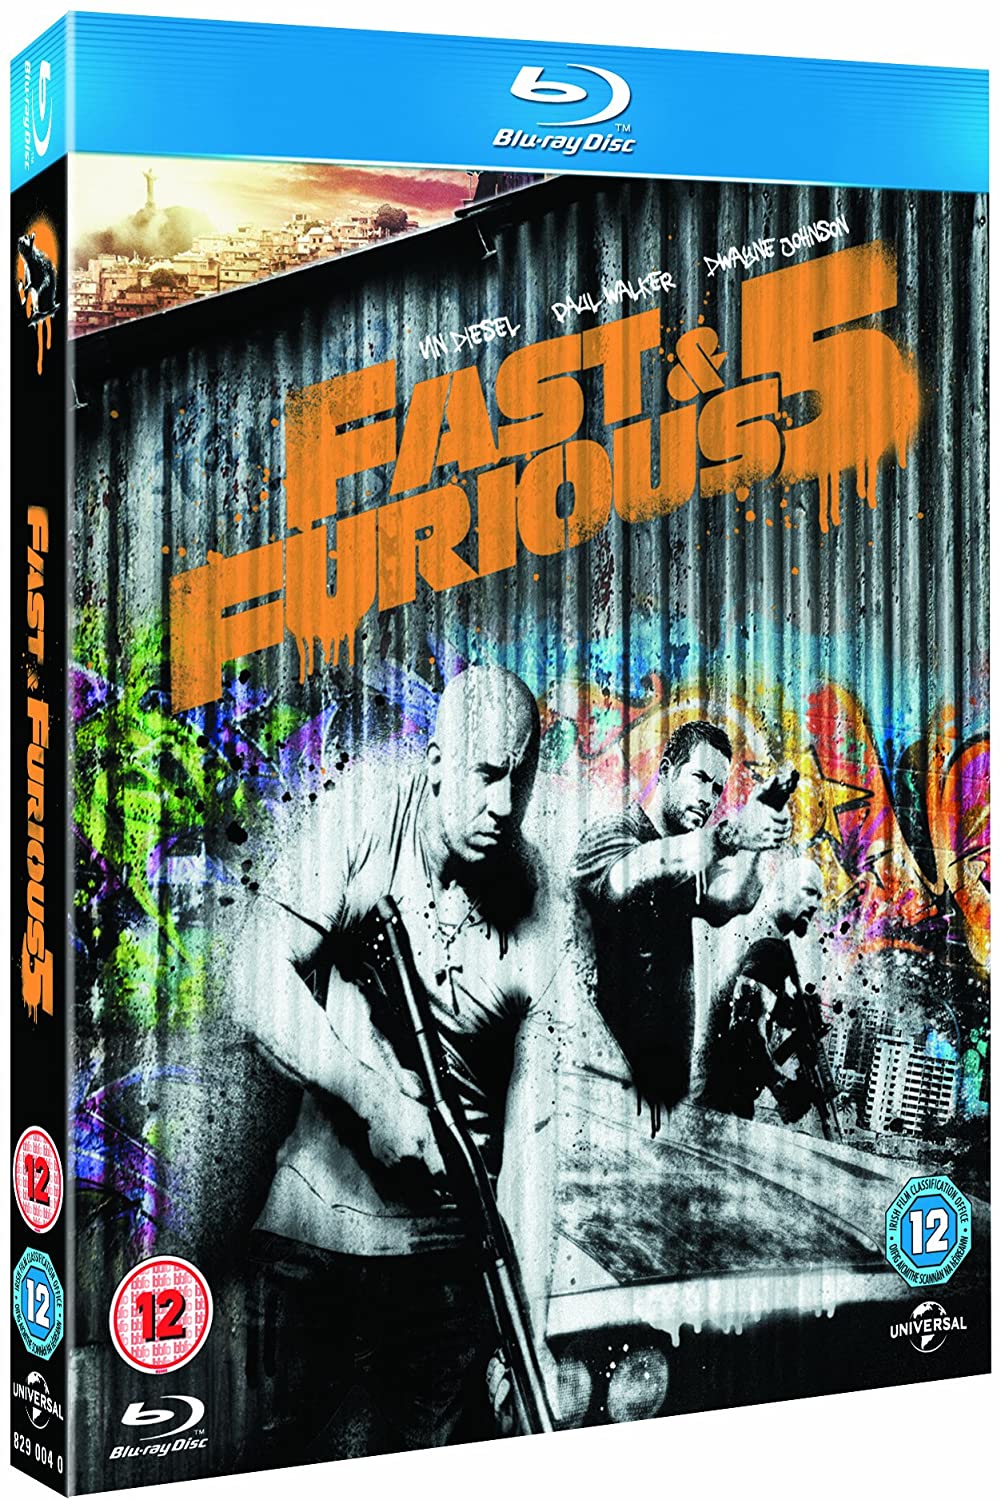 Fast &amp; Furious 5 [2011] – Action [Blu-ray]